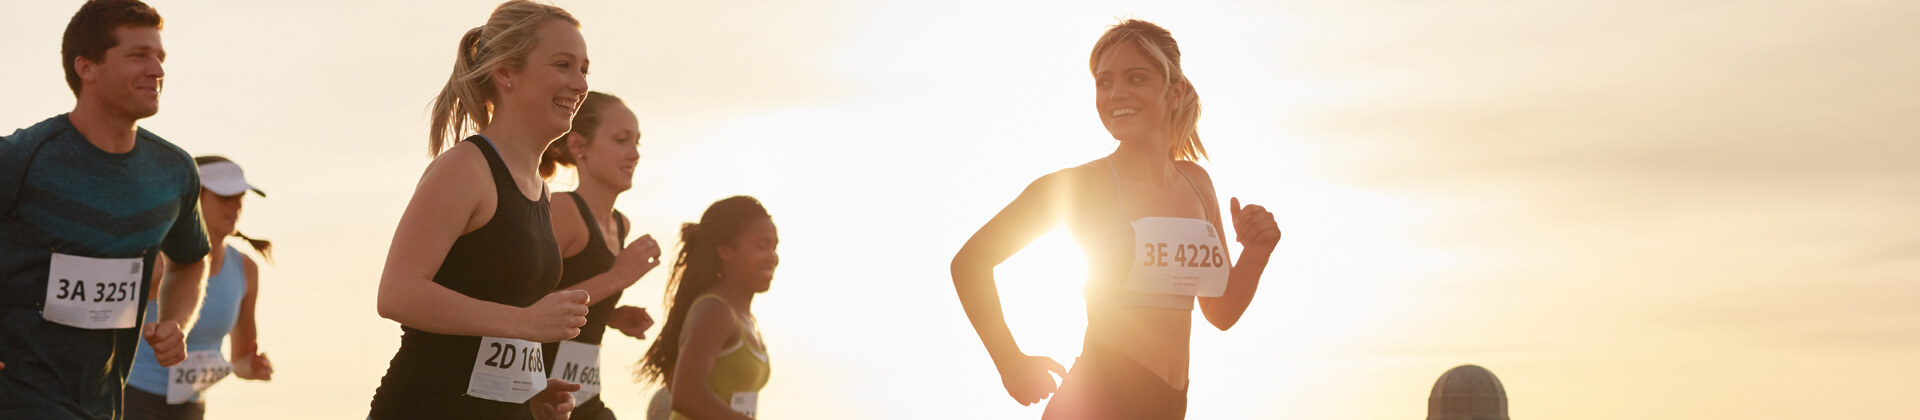 Women in tank tops and numbers run a race and smile with the sun behind them 